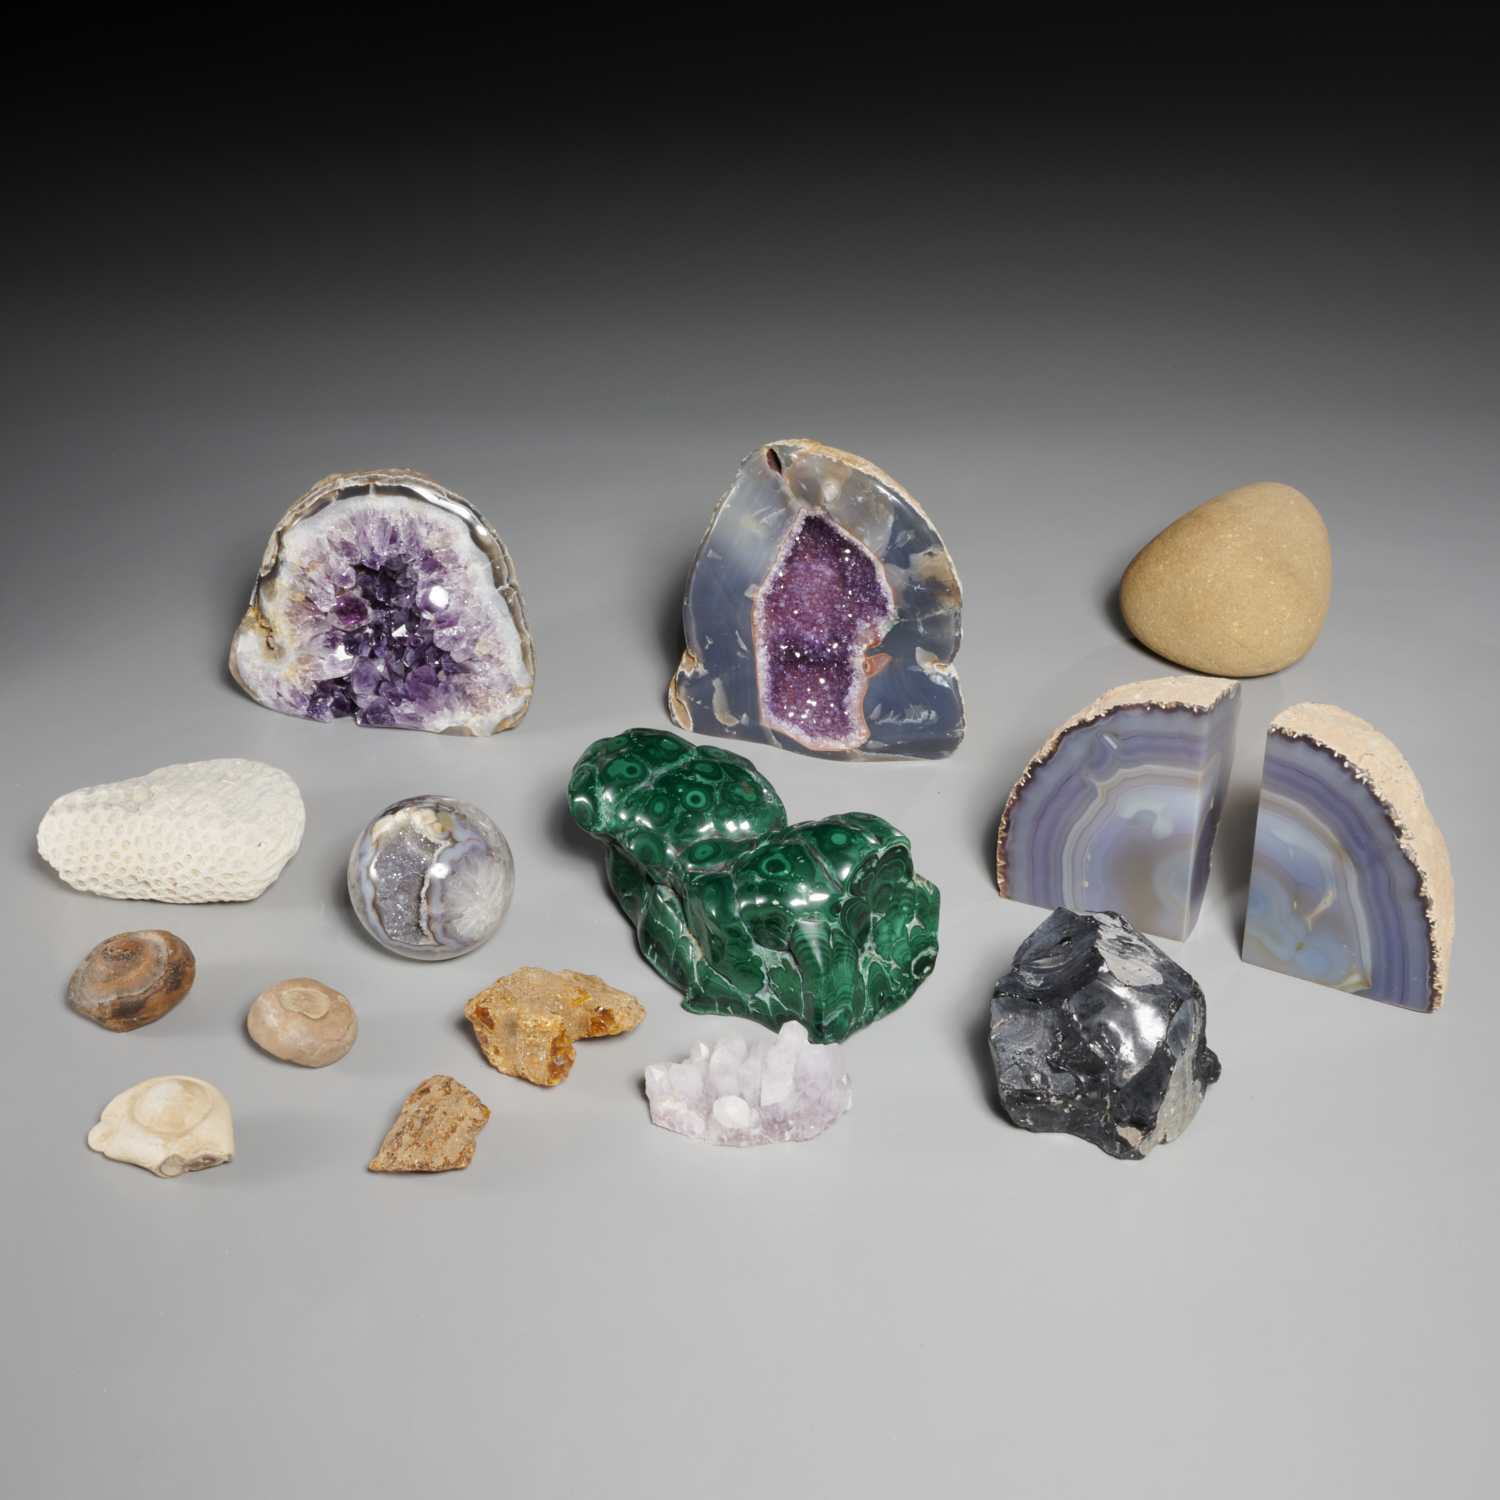 GEODE AND MINERAL SPECIMEN COLLECTION 360c22